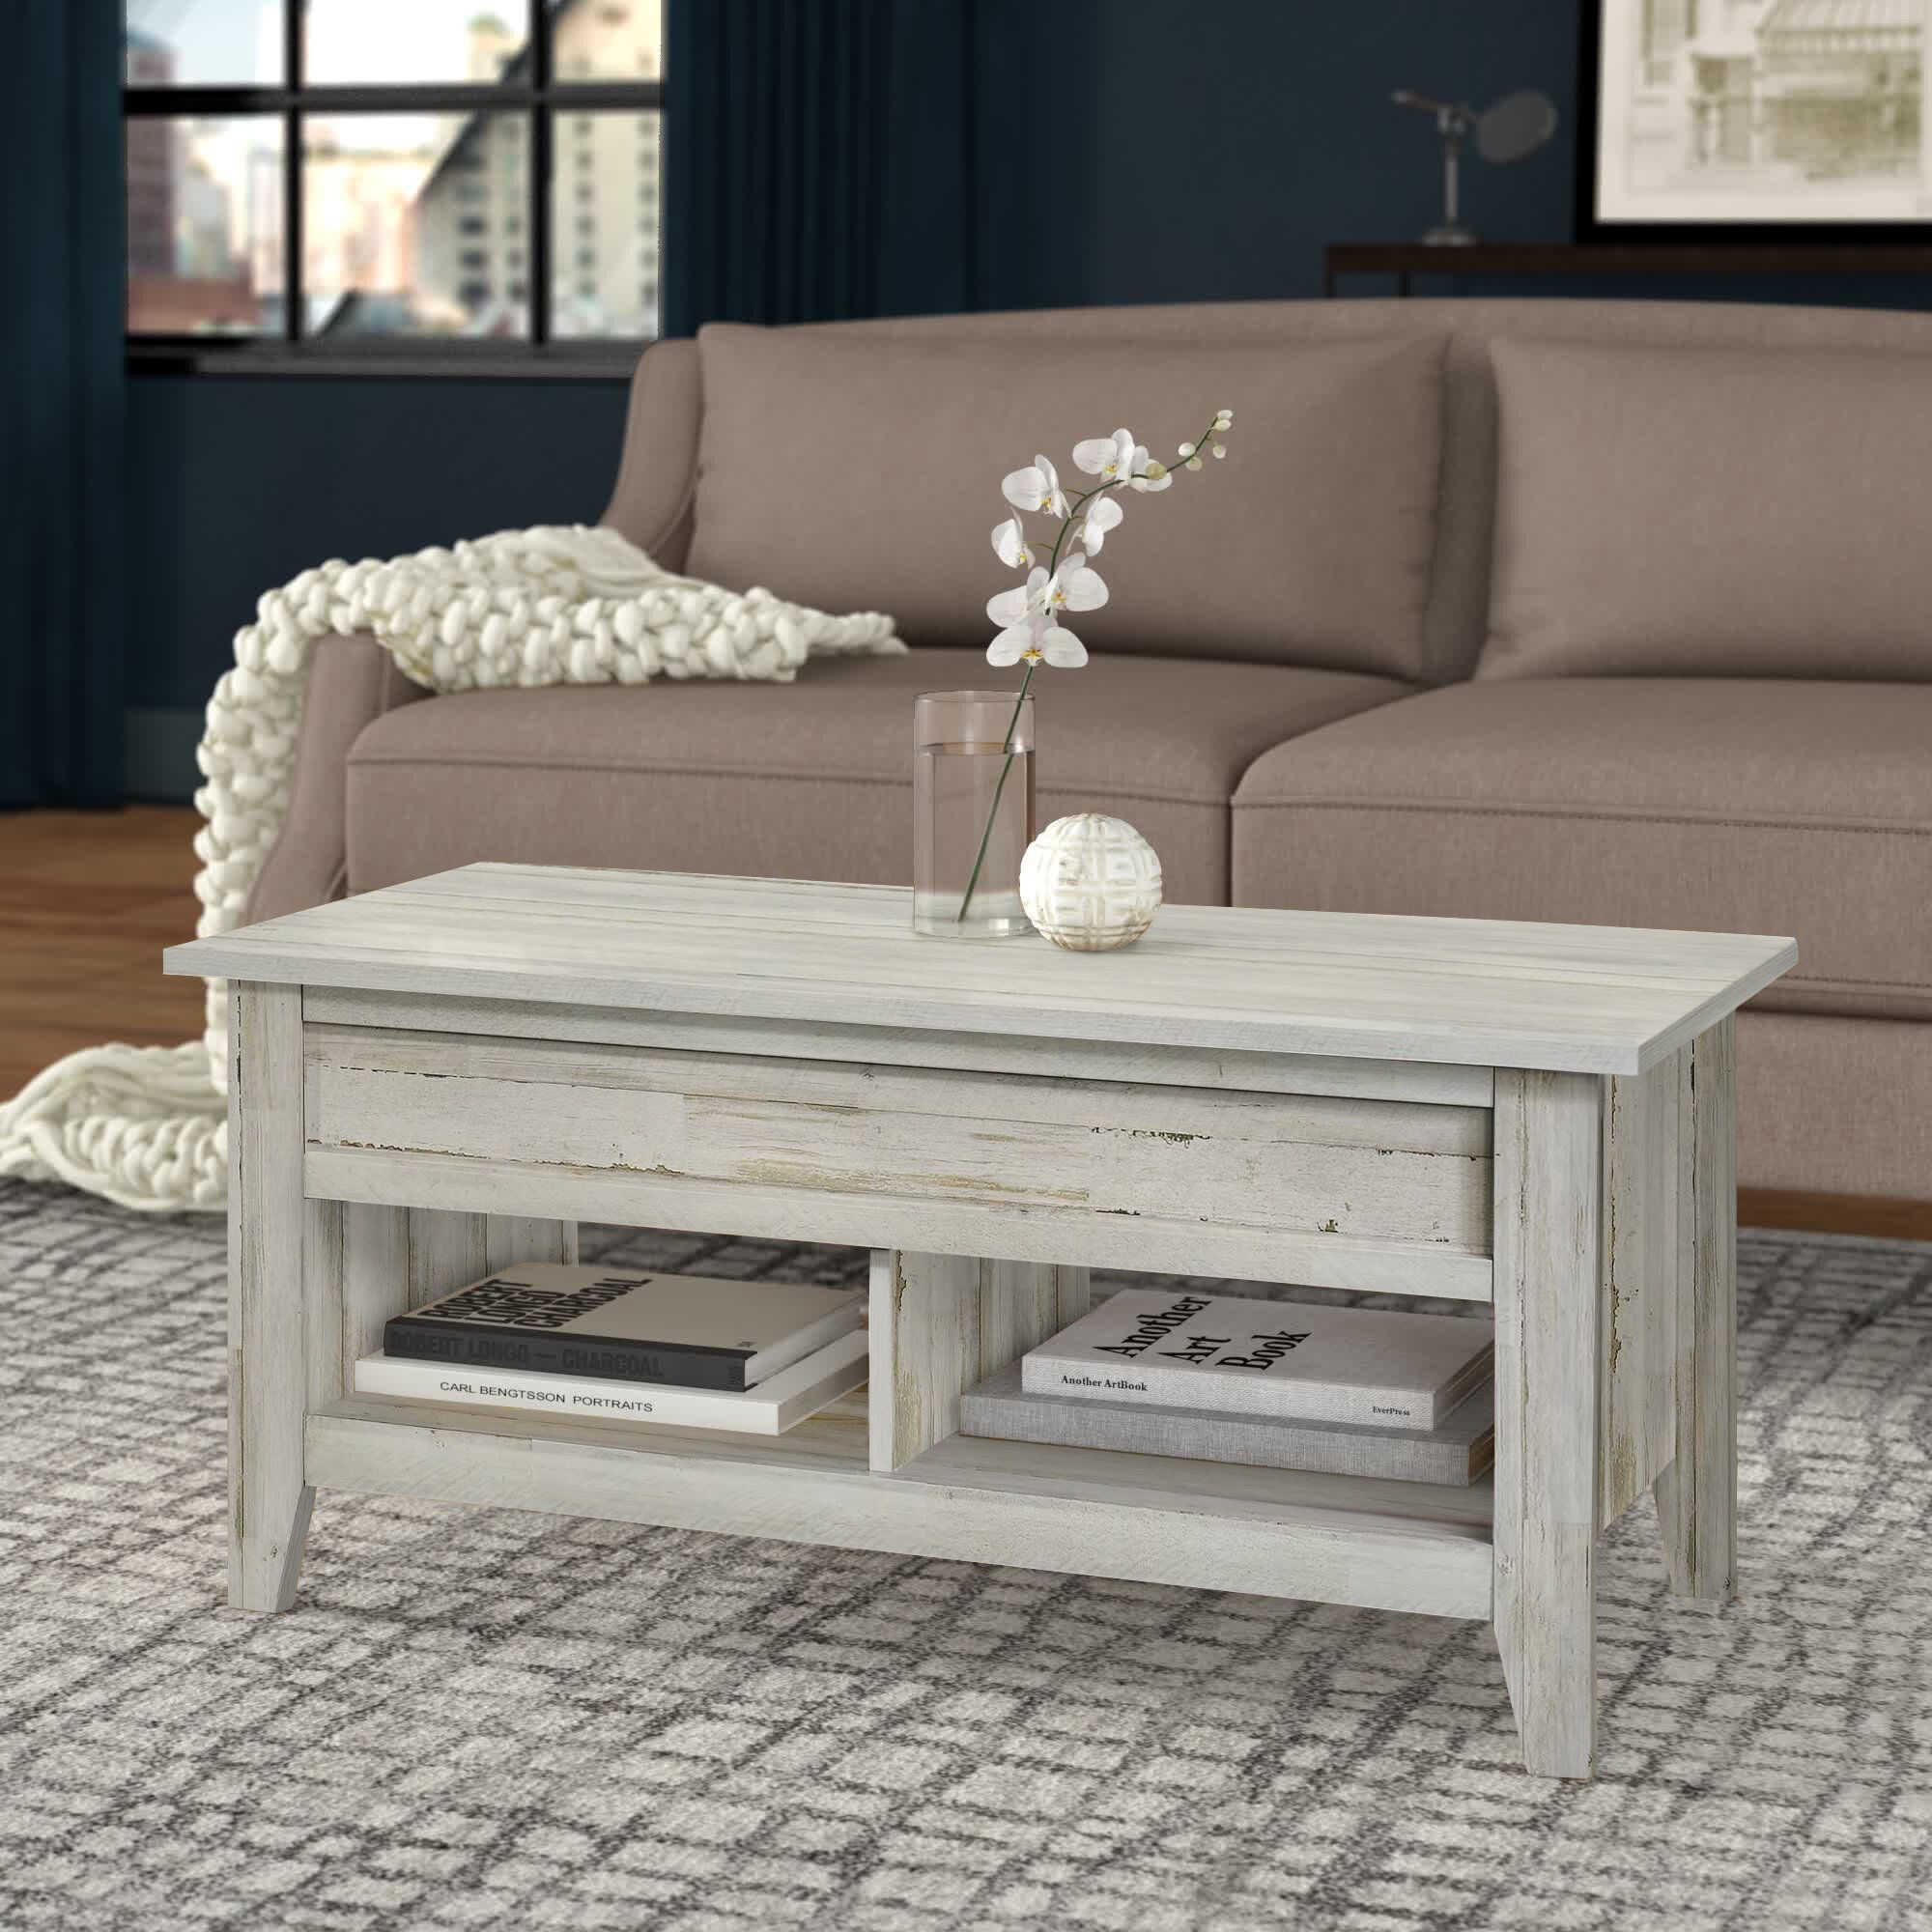 Millwood Pines Orelia Lift Top Extendable Coffee Table With Storage &  Reviews | Wayfair Within Lift Top Storage Coffee Tables (View 13 of 20)